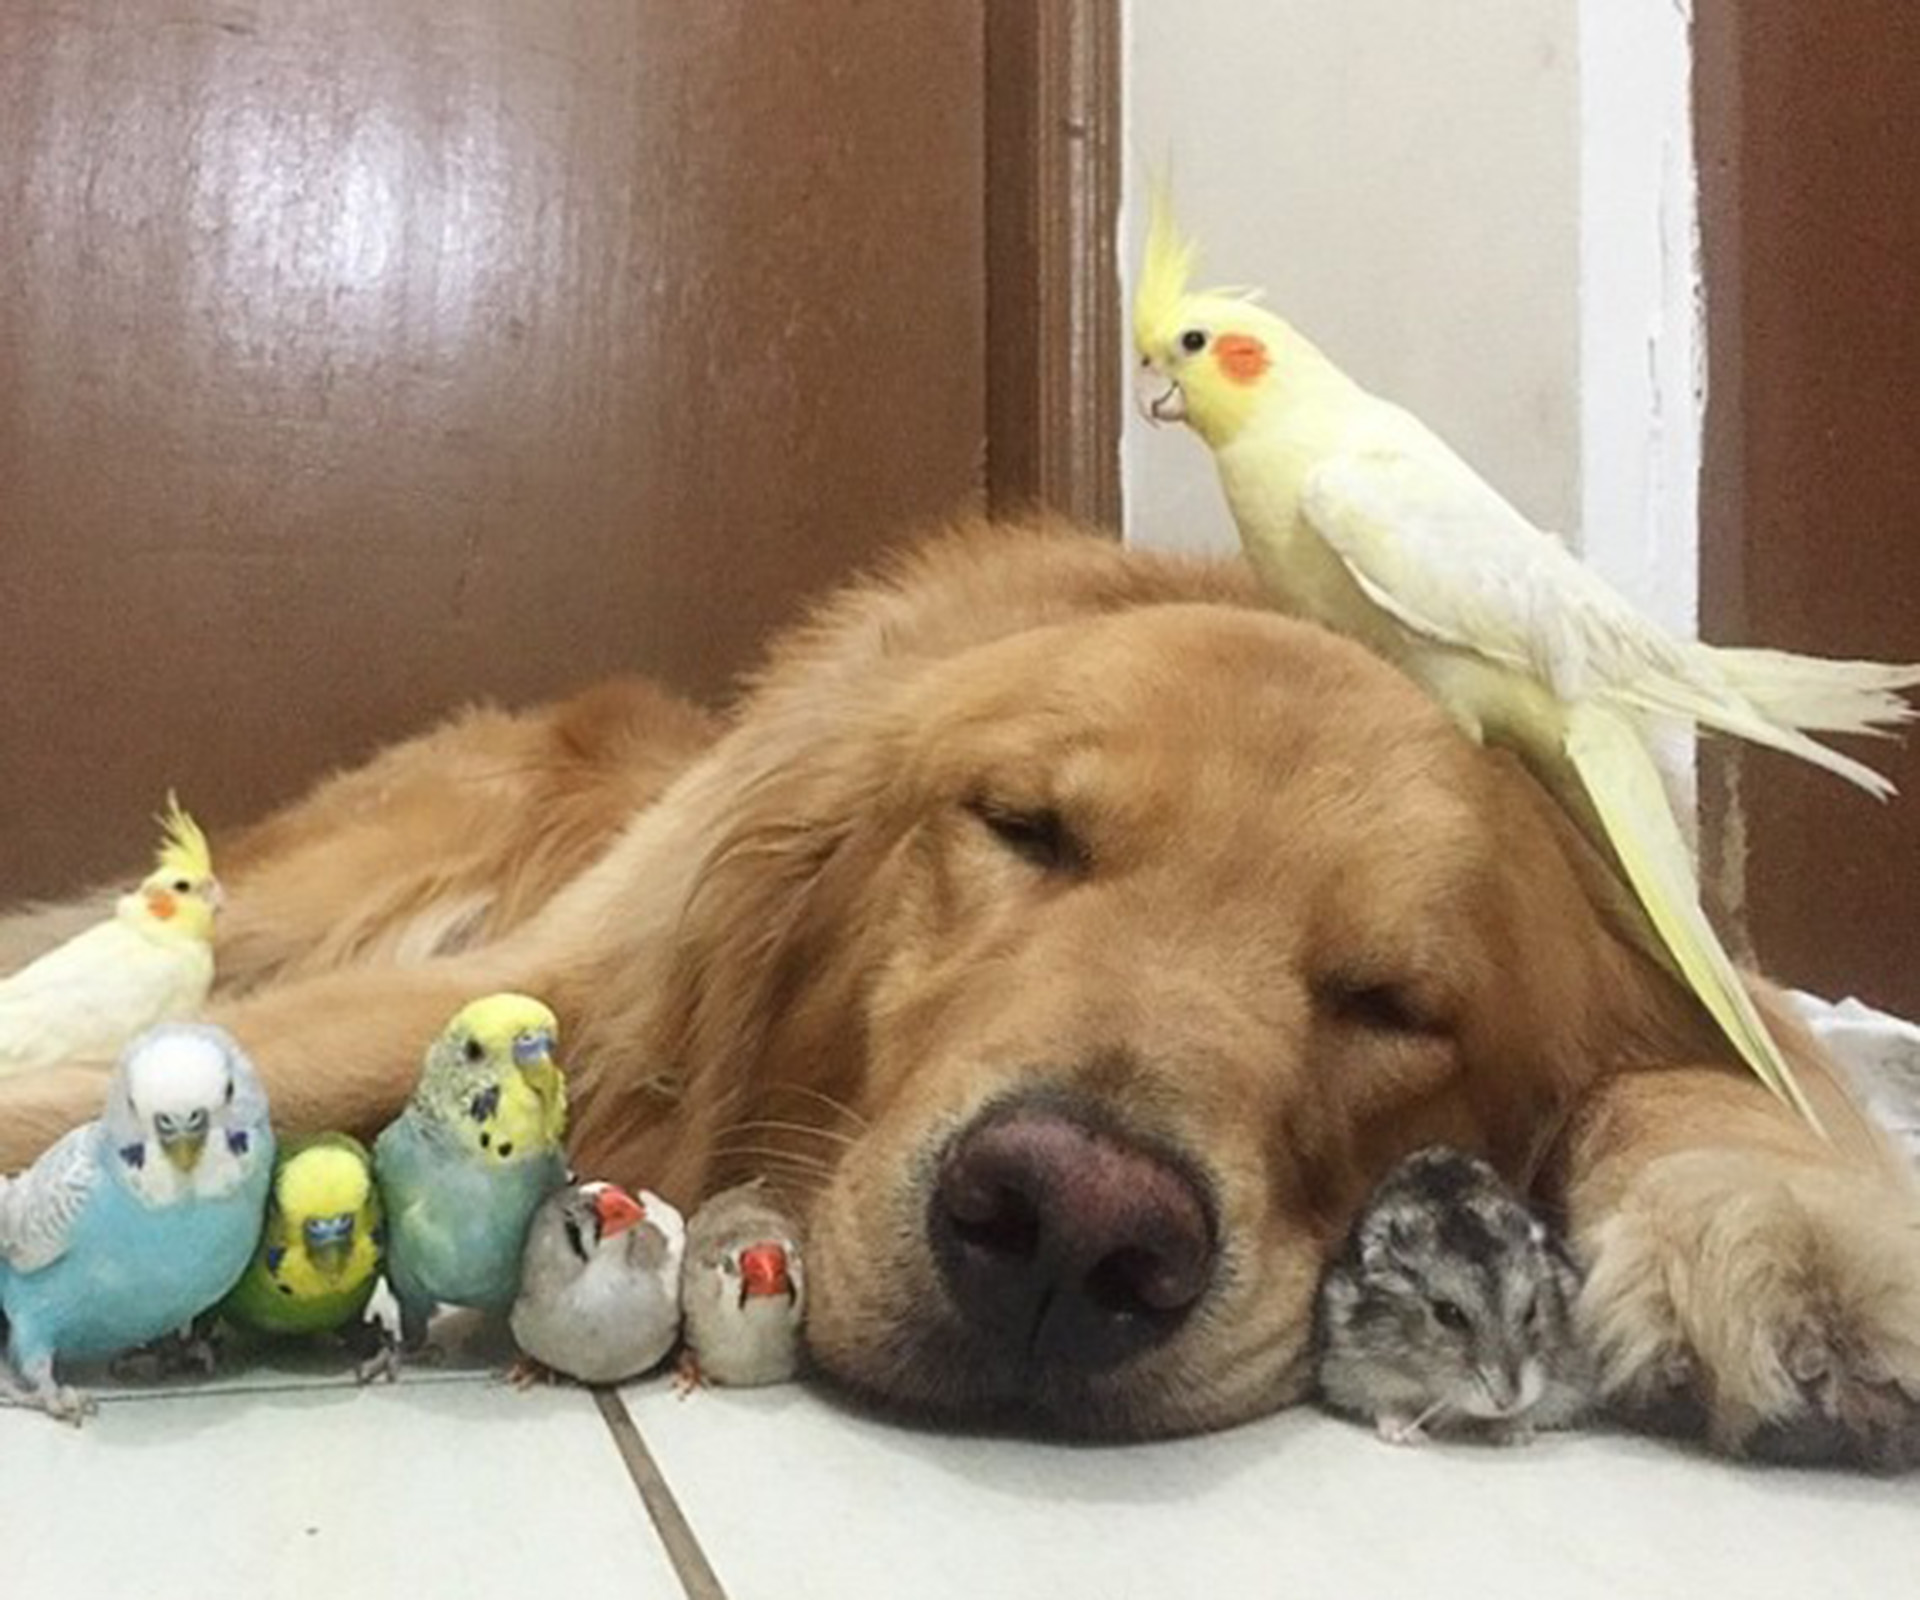 The most adorable animal friendship on the internet